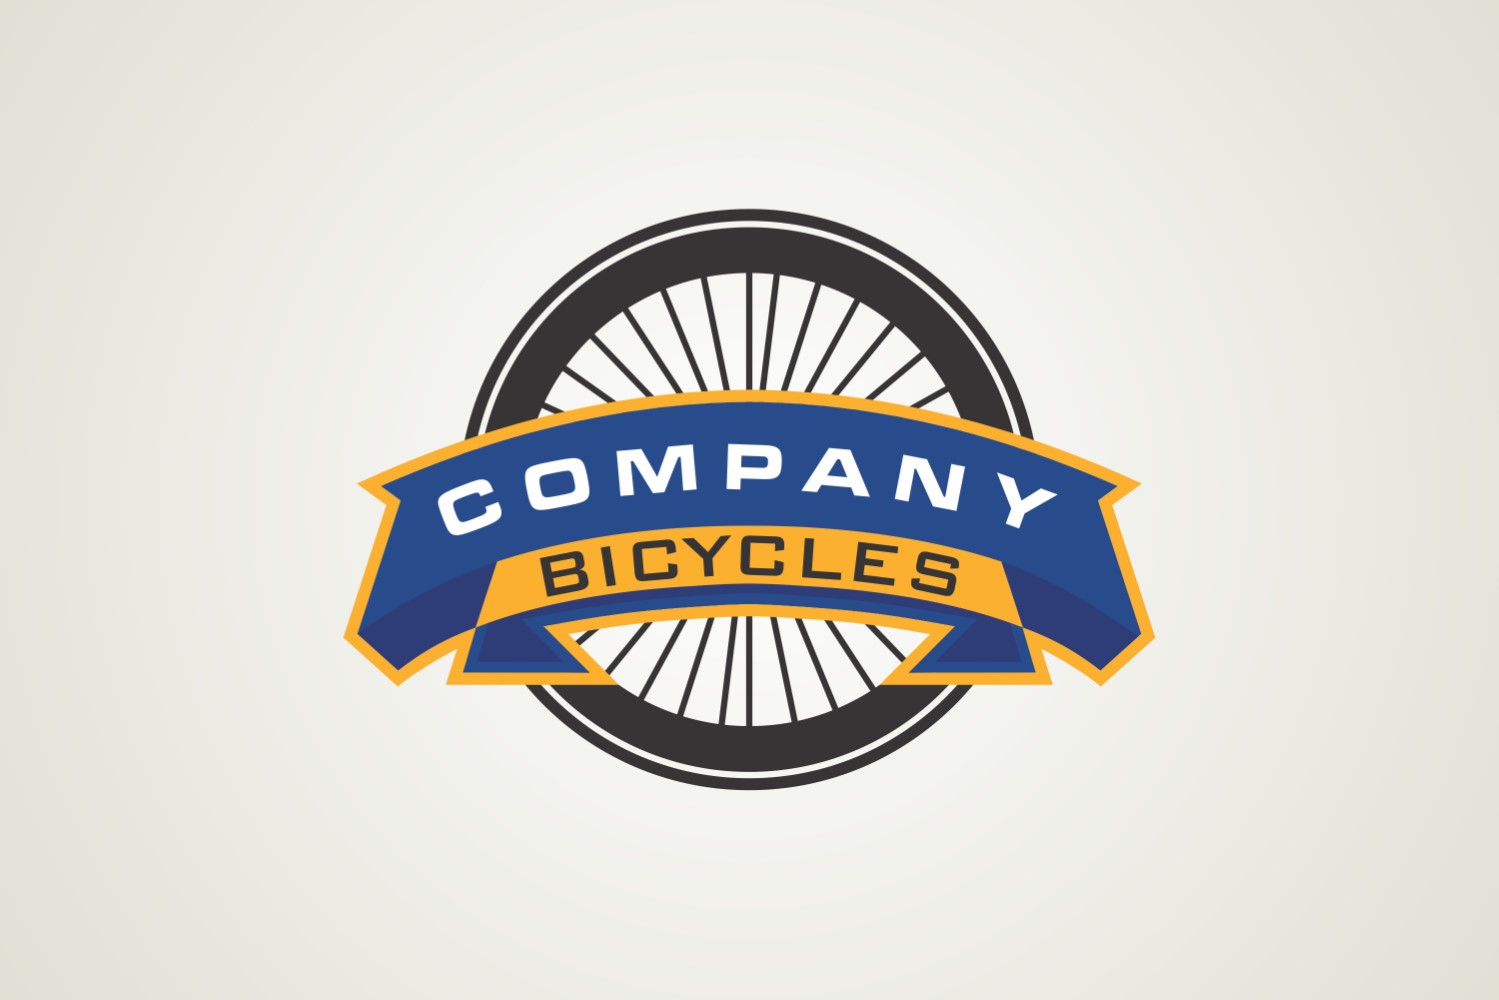 Company Bicycles Logo Design Template